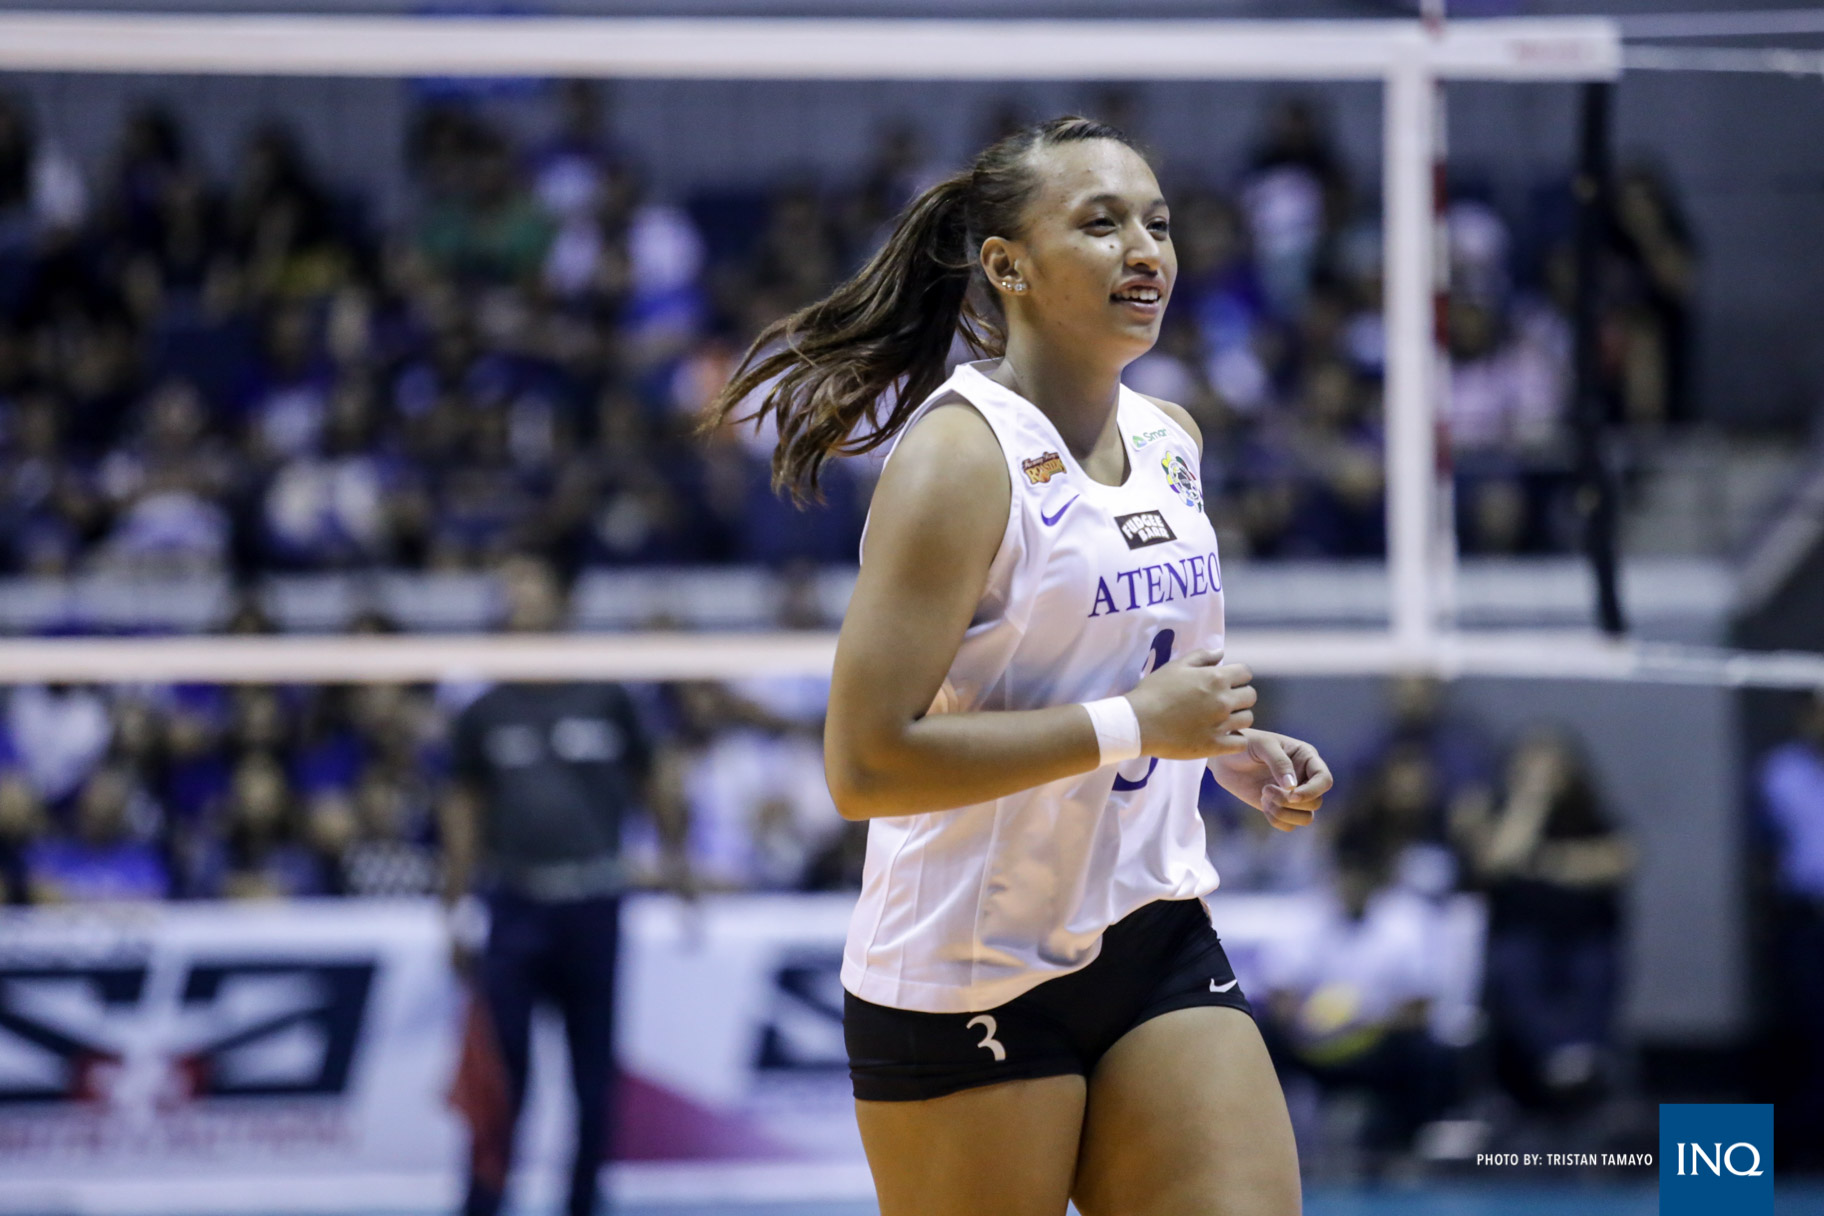 Ateneo's Michelle Morente. Photo by Tristan Tamayo/INQUIRER.net